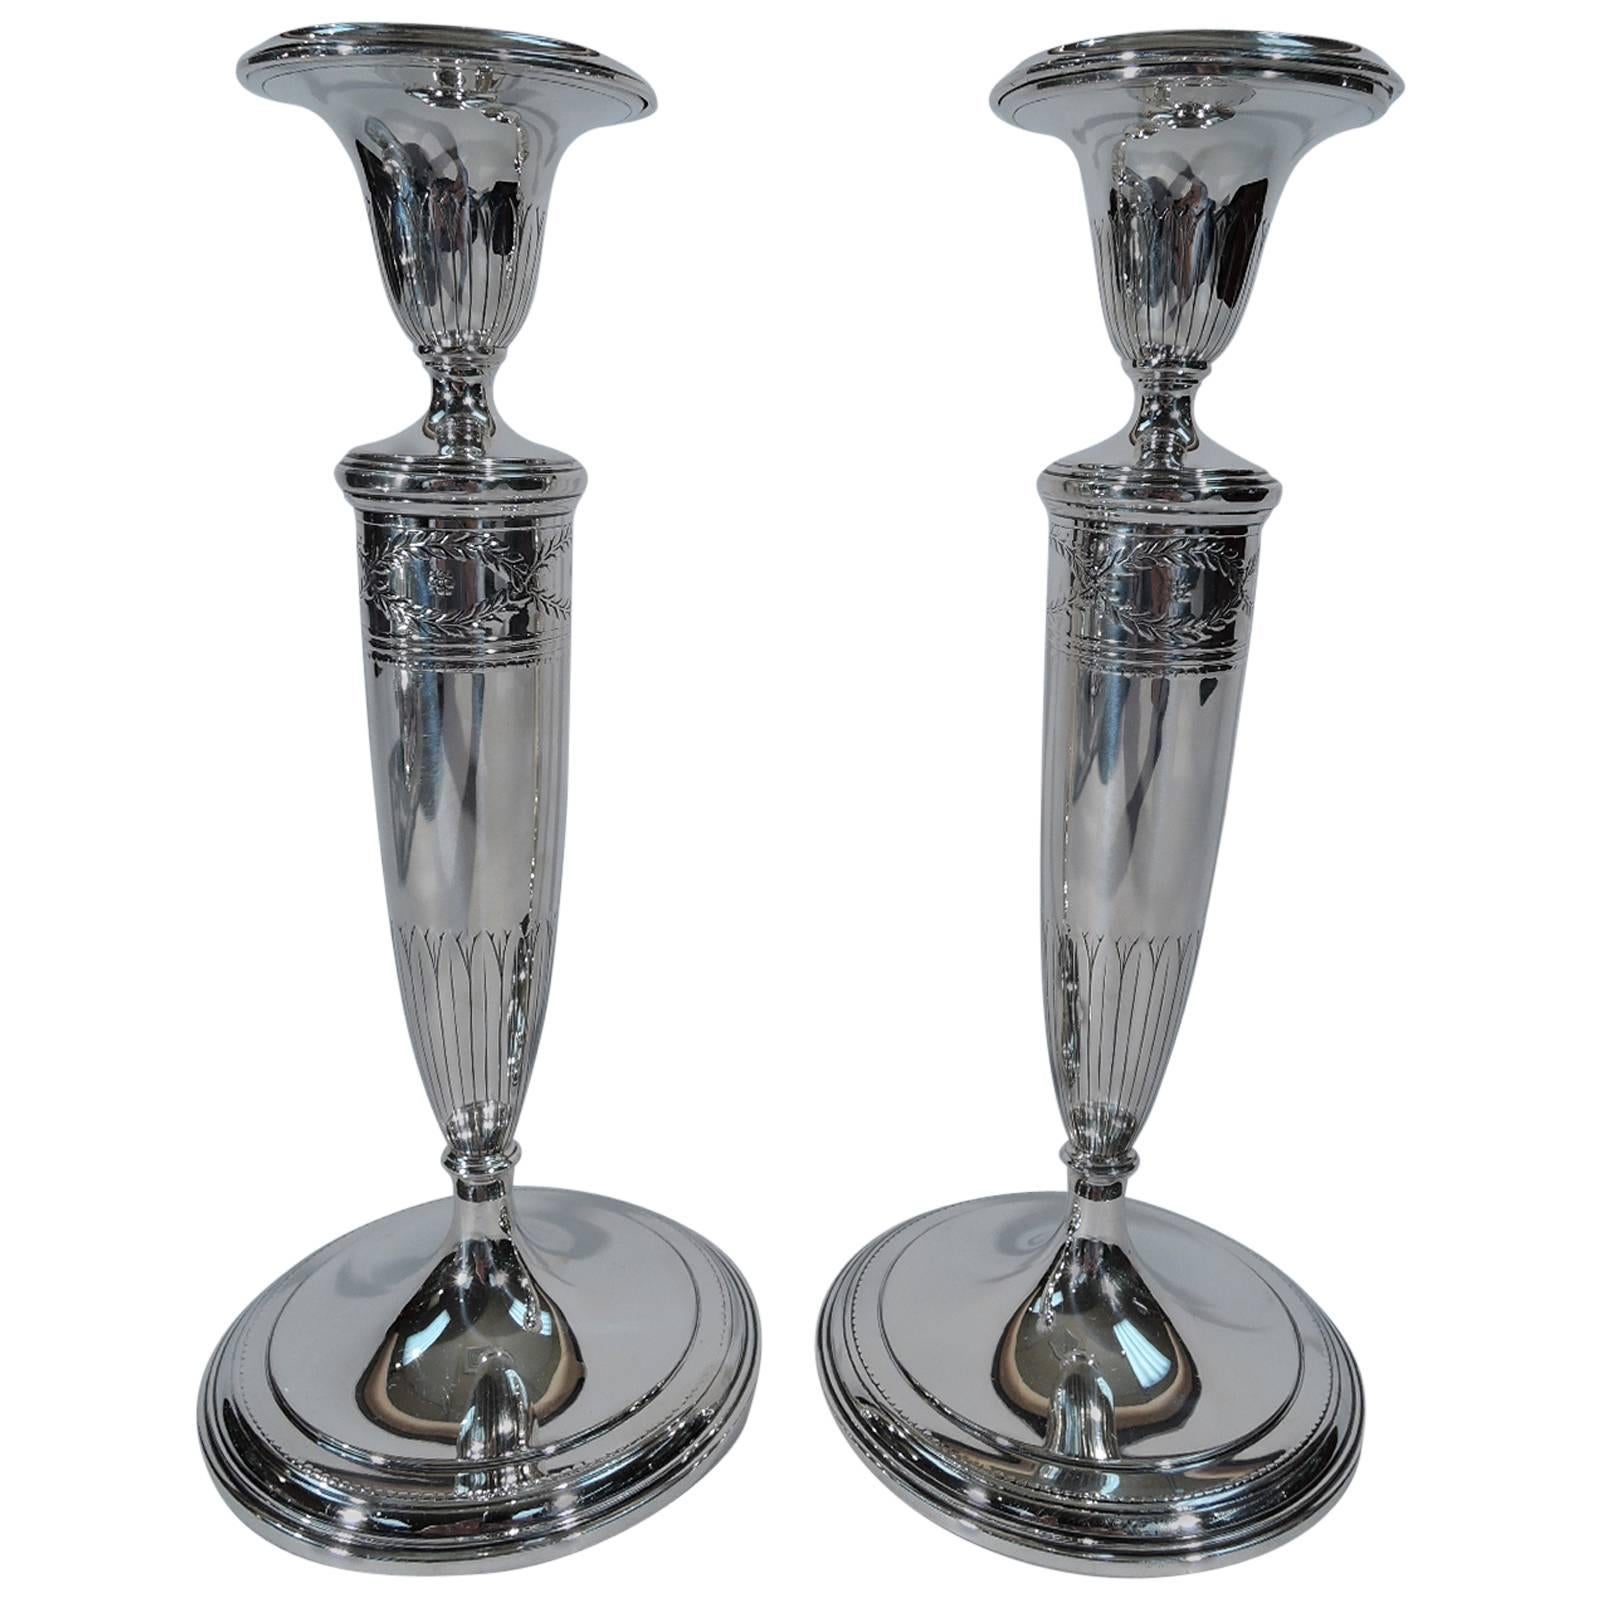 Pair of Tiffany Winthrop Sterling Silver Candlesticks